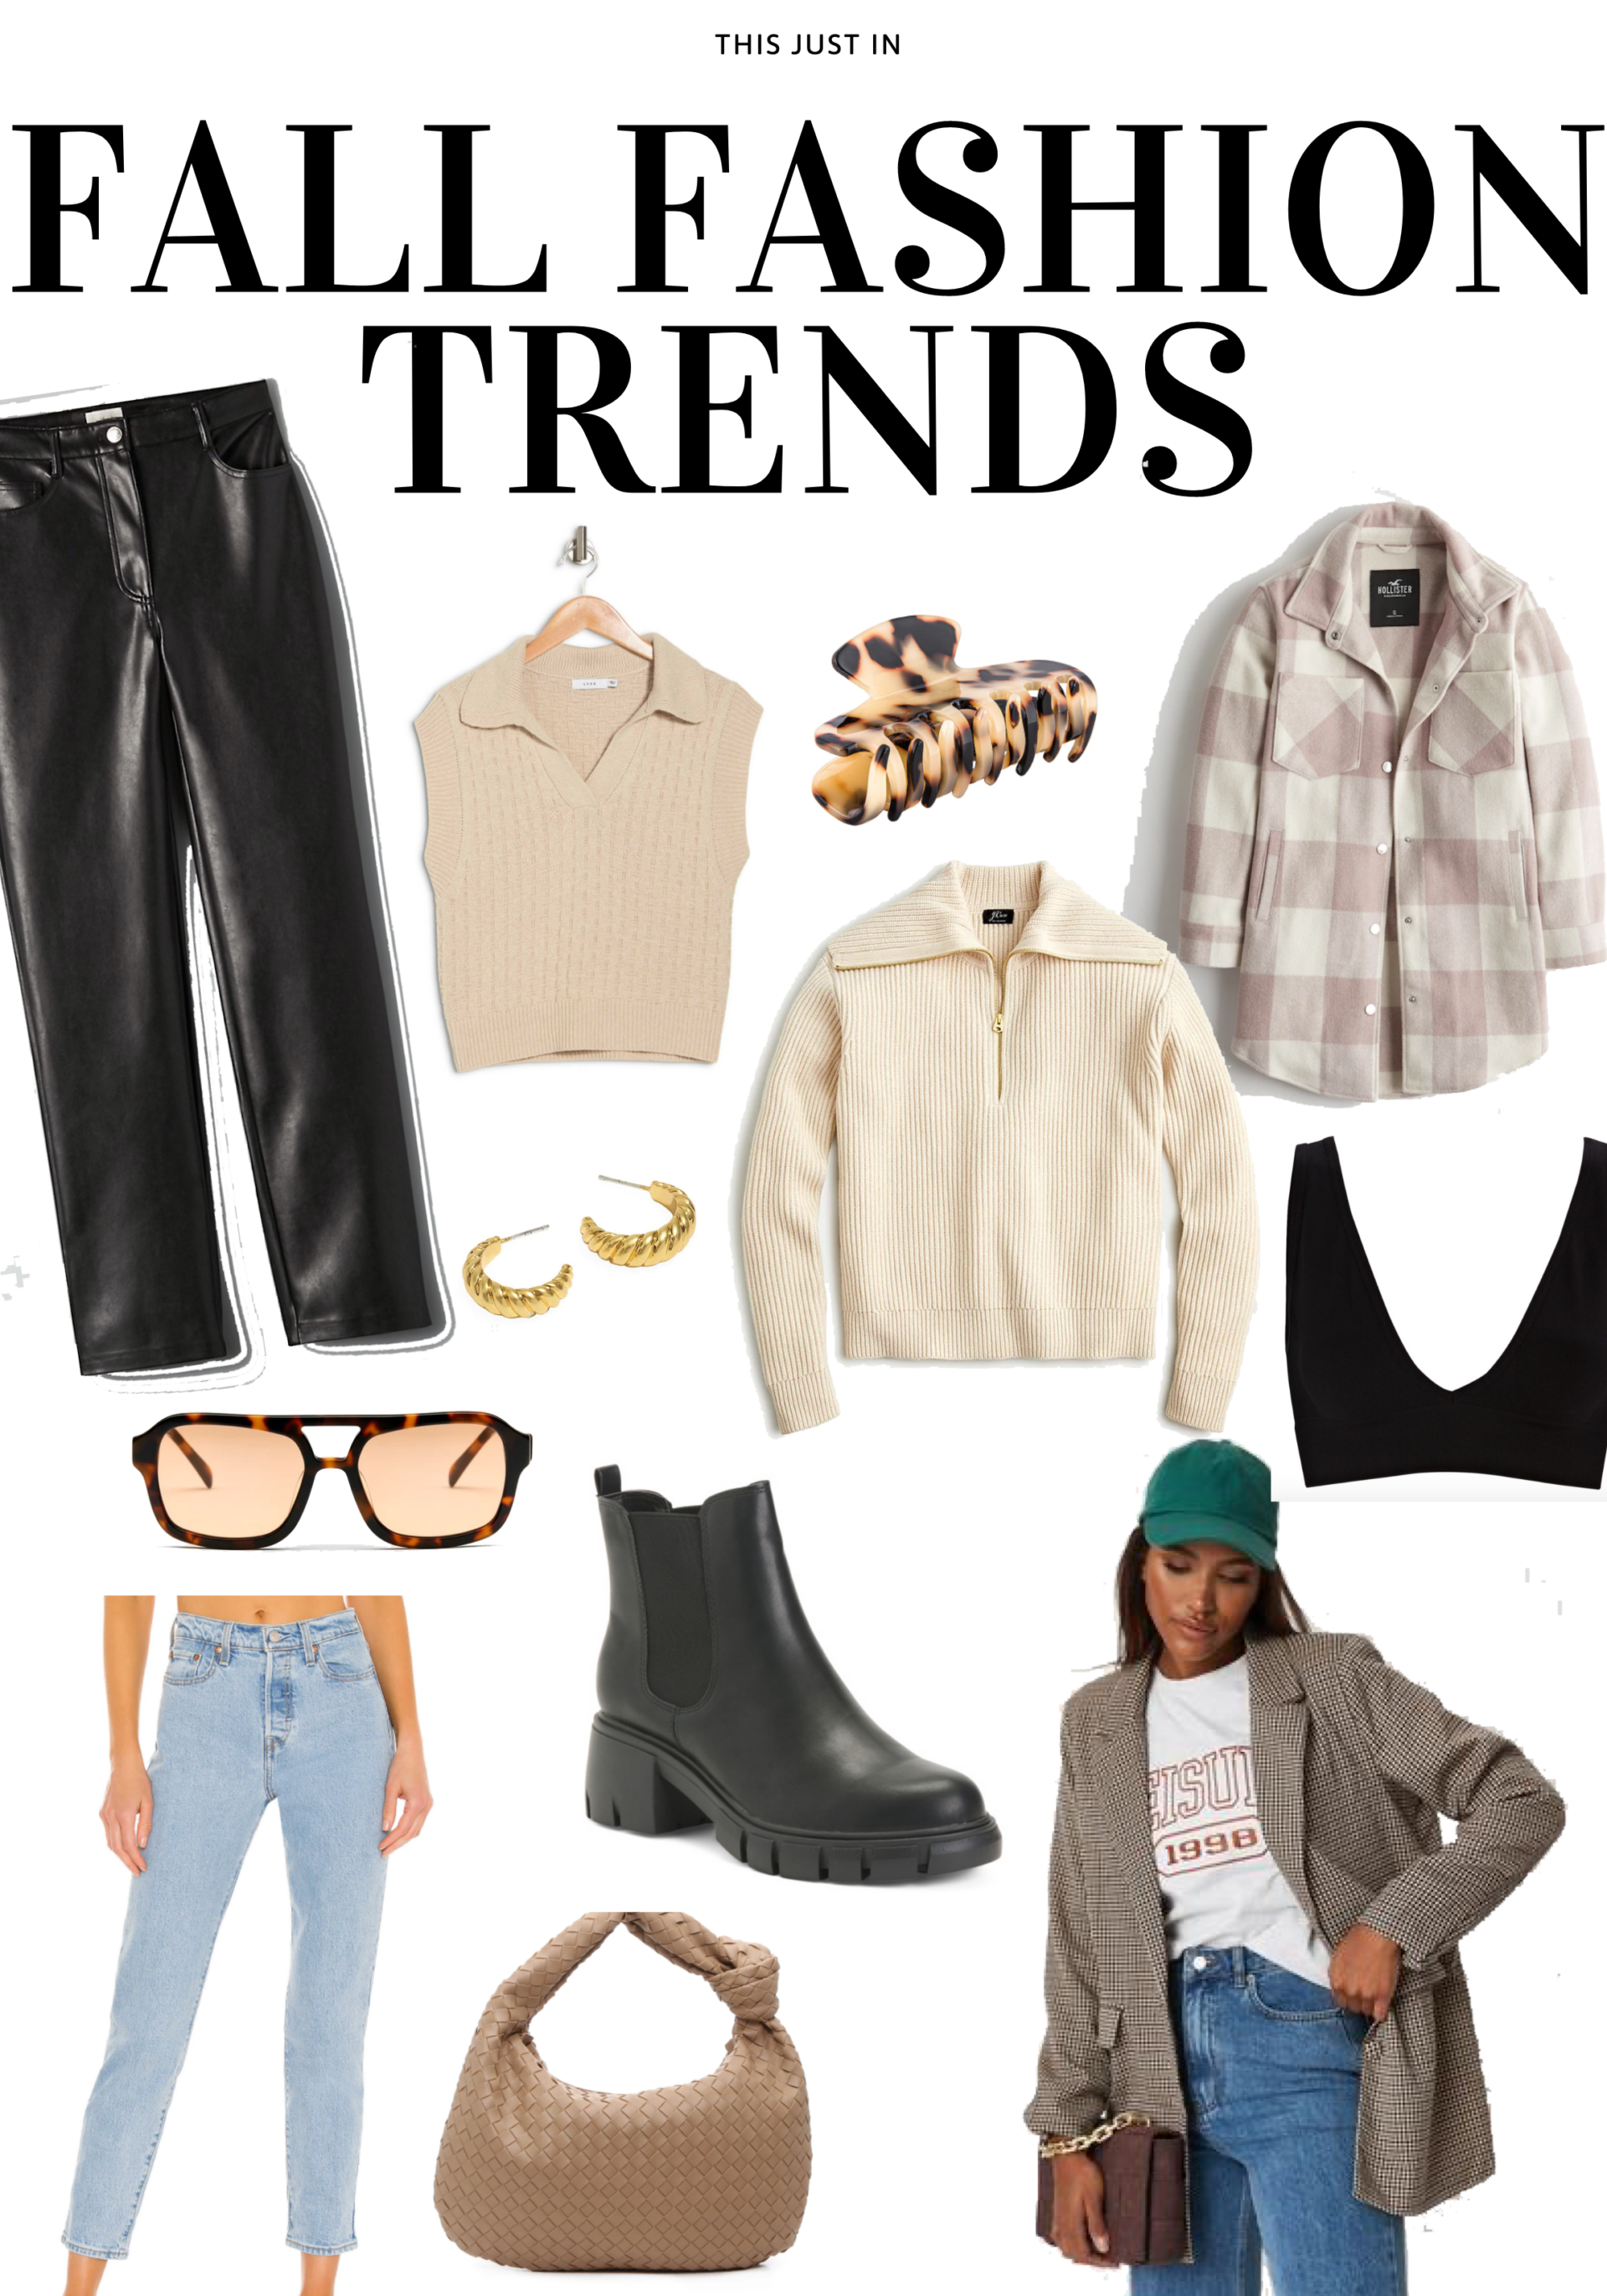 Fall Fashion Trends for the Season